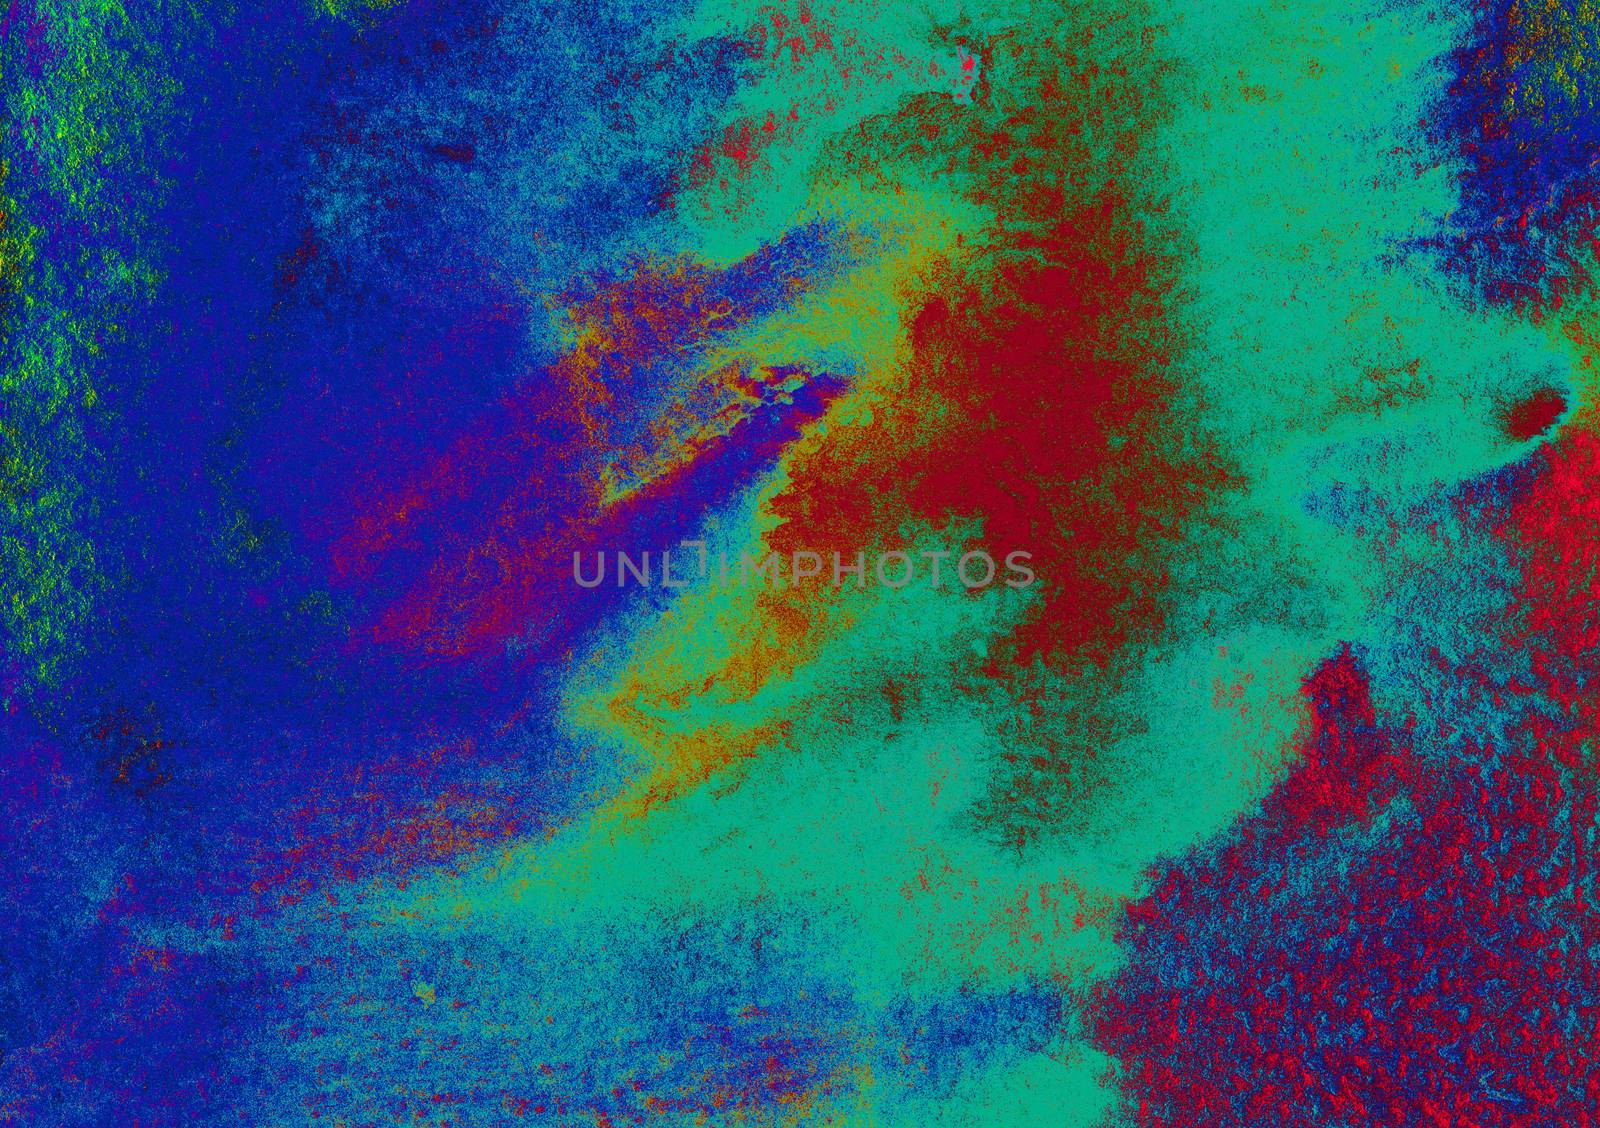 Blue green orange colors on textured paper background. Grunge vibrant painting effect pattern. Raster illustration with space for text, for media advertising website fashion concept design, banner by LanaLeta